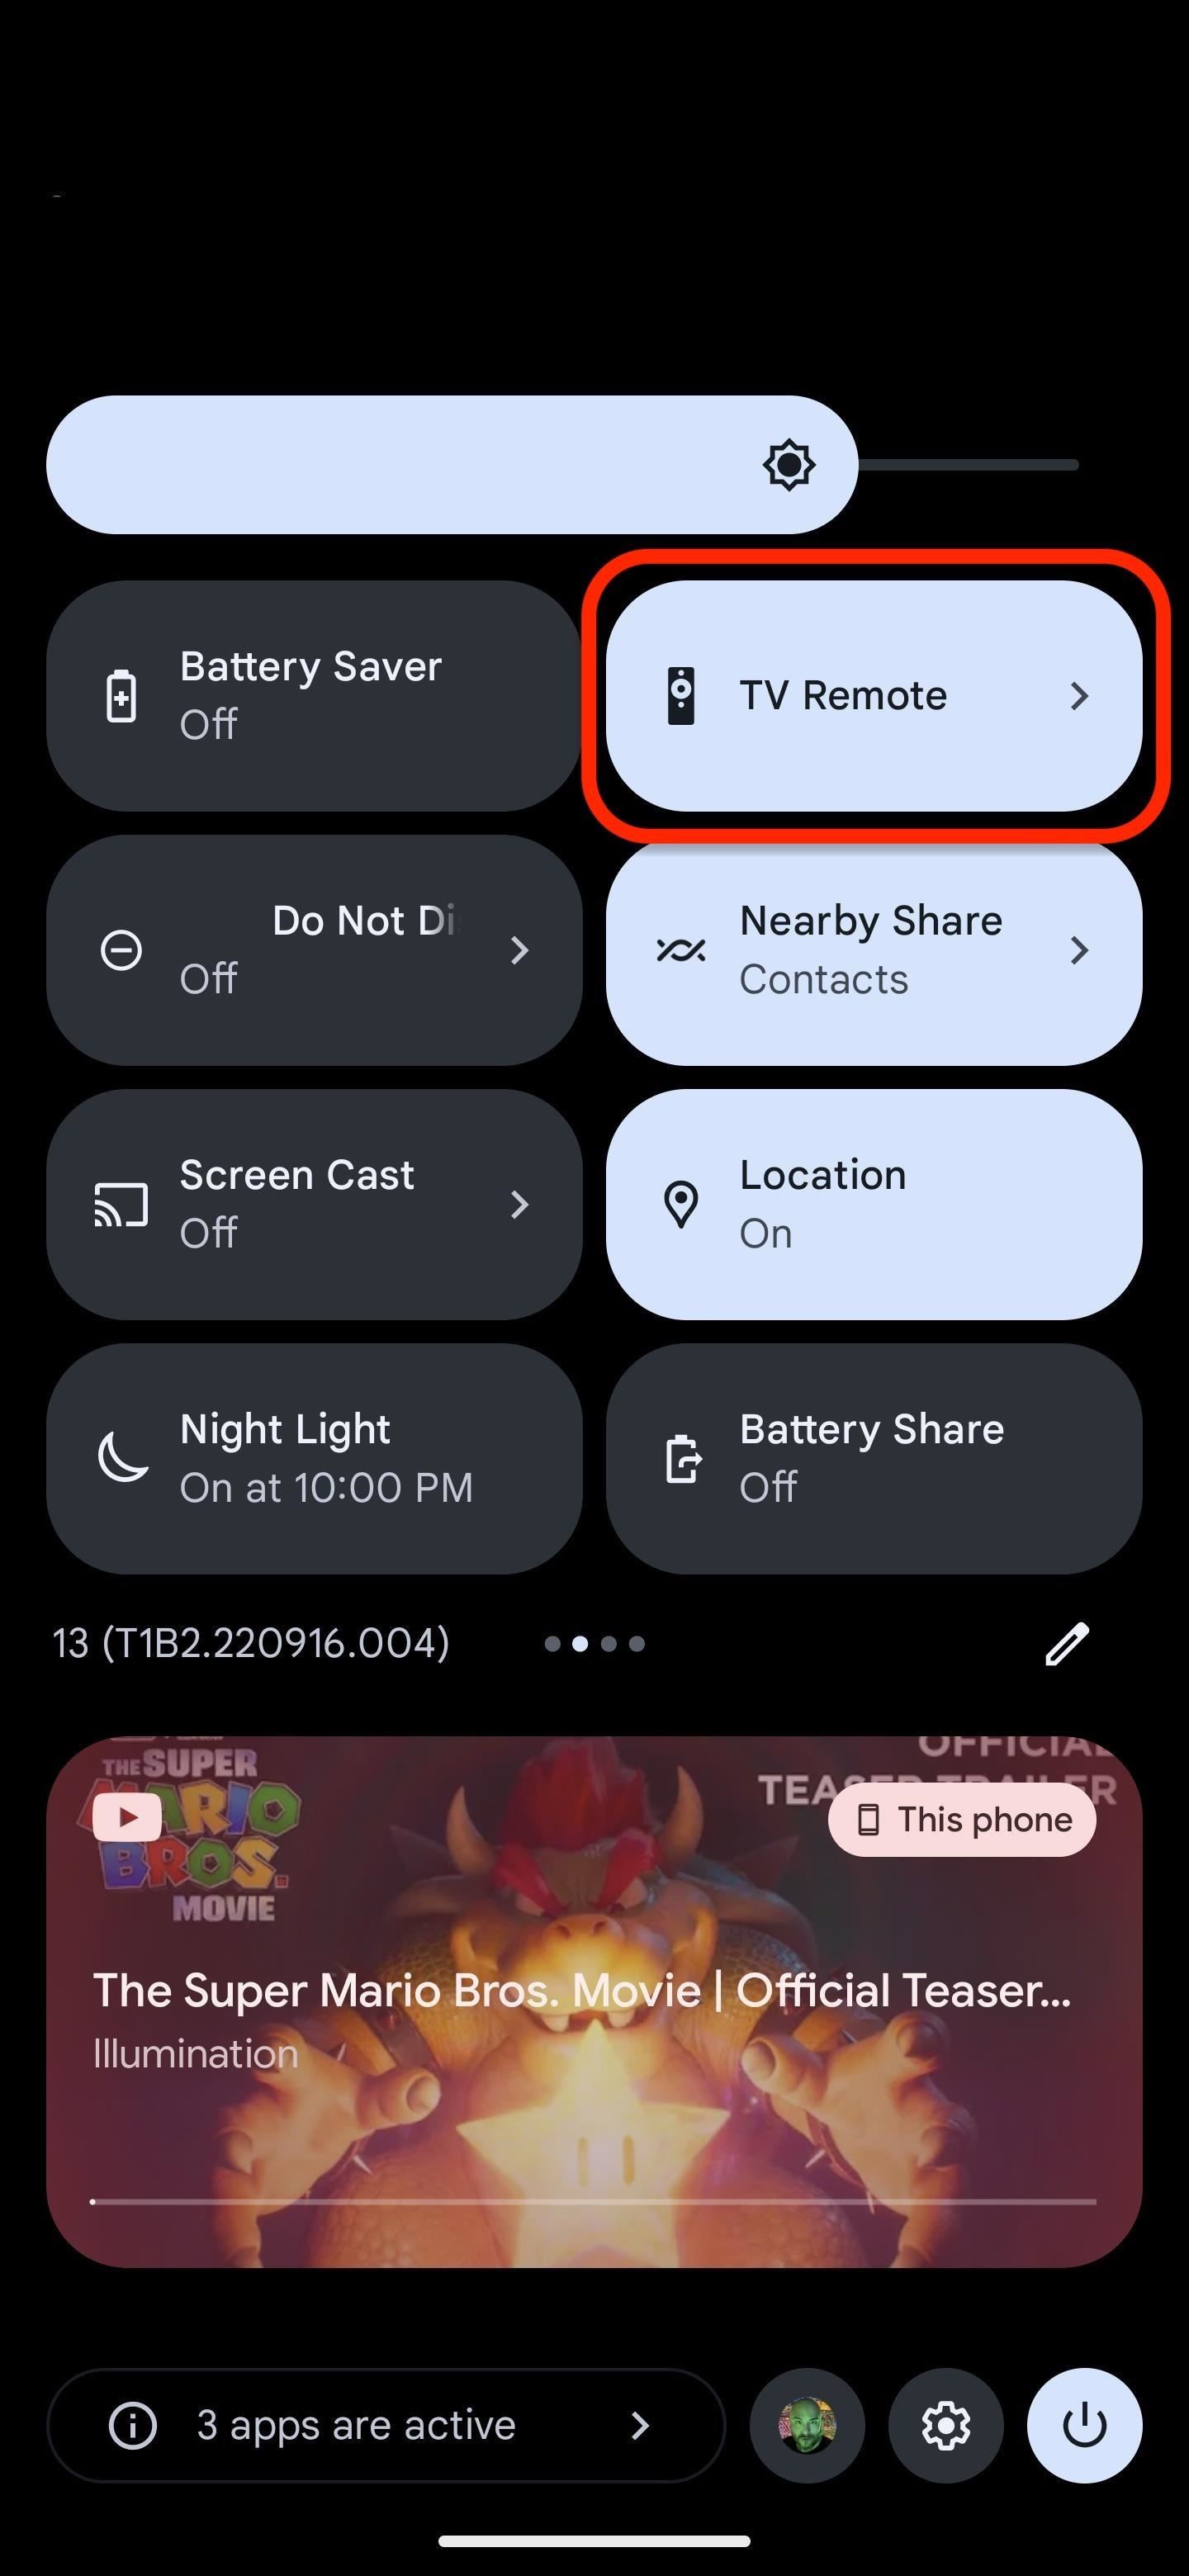 How to Use Your iPhone or Android Phone as a Remote Control for Android TV or Google TV